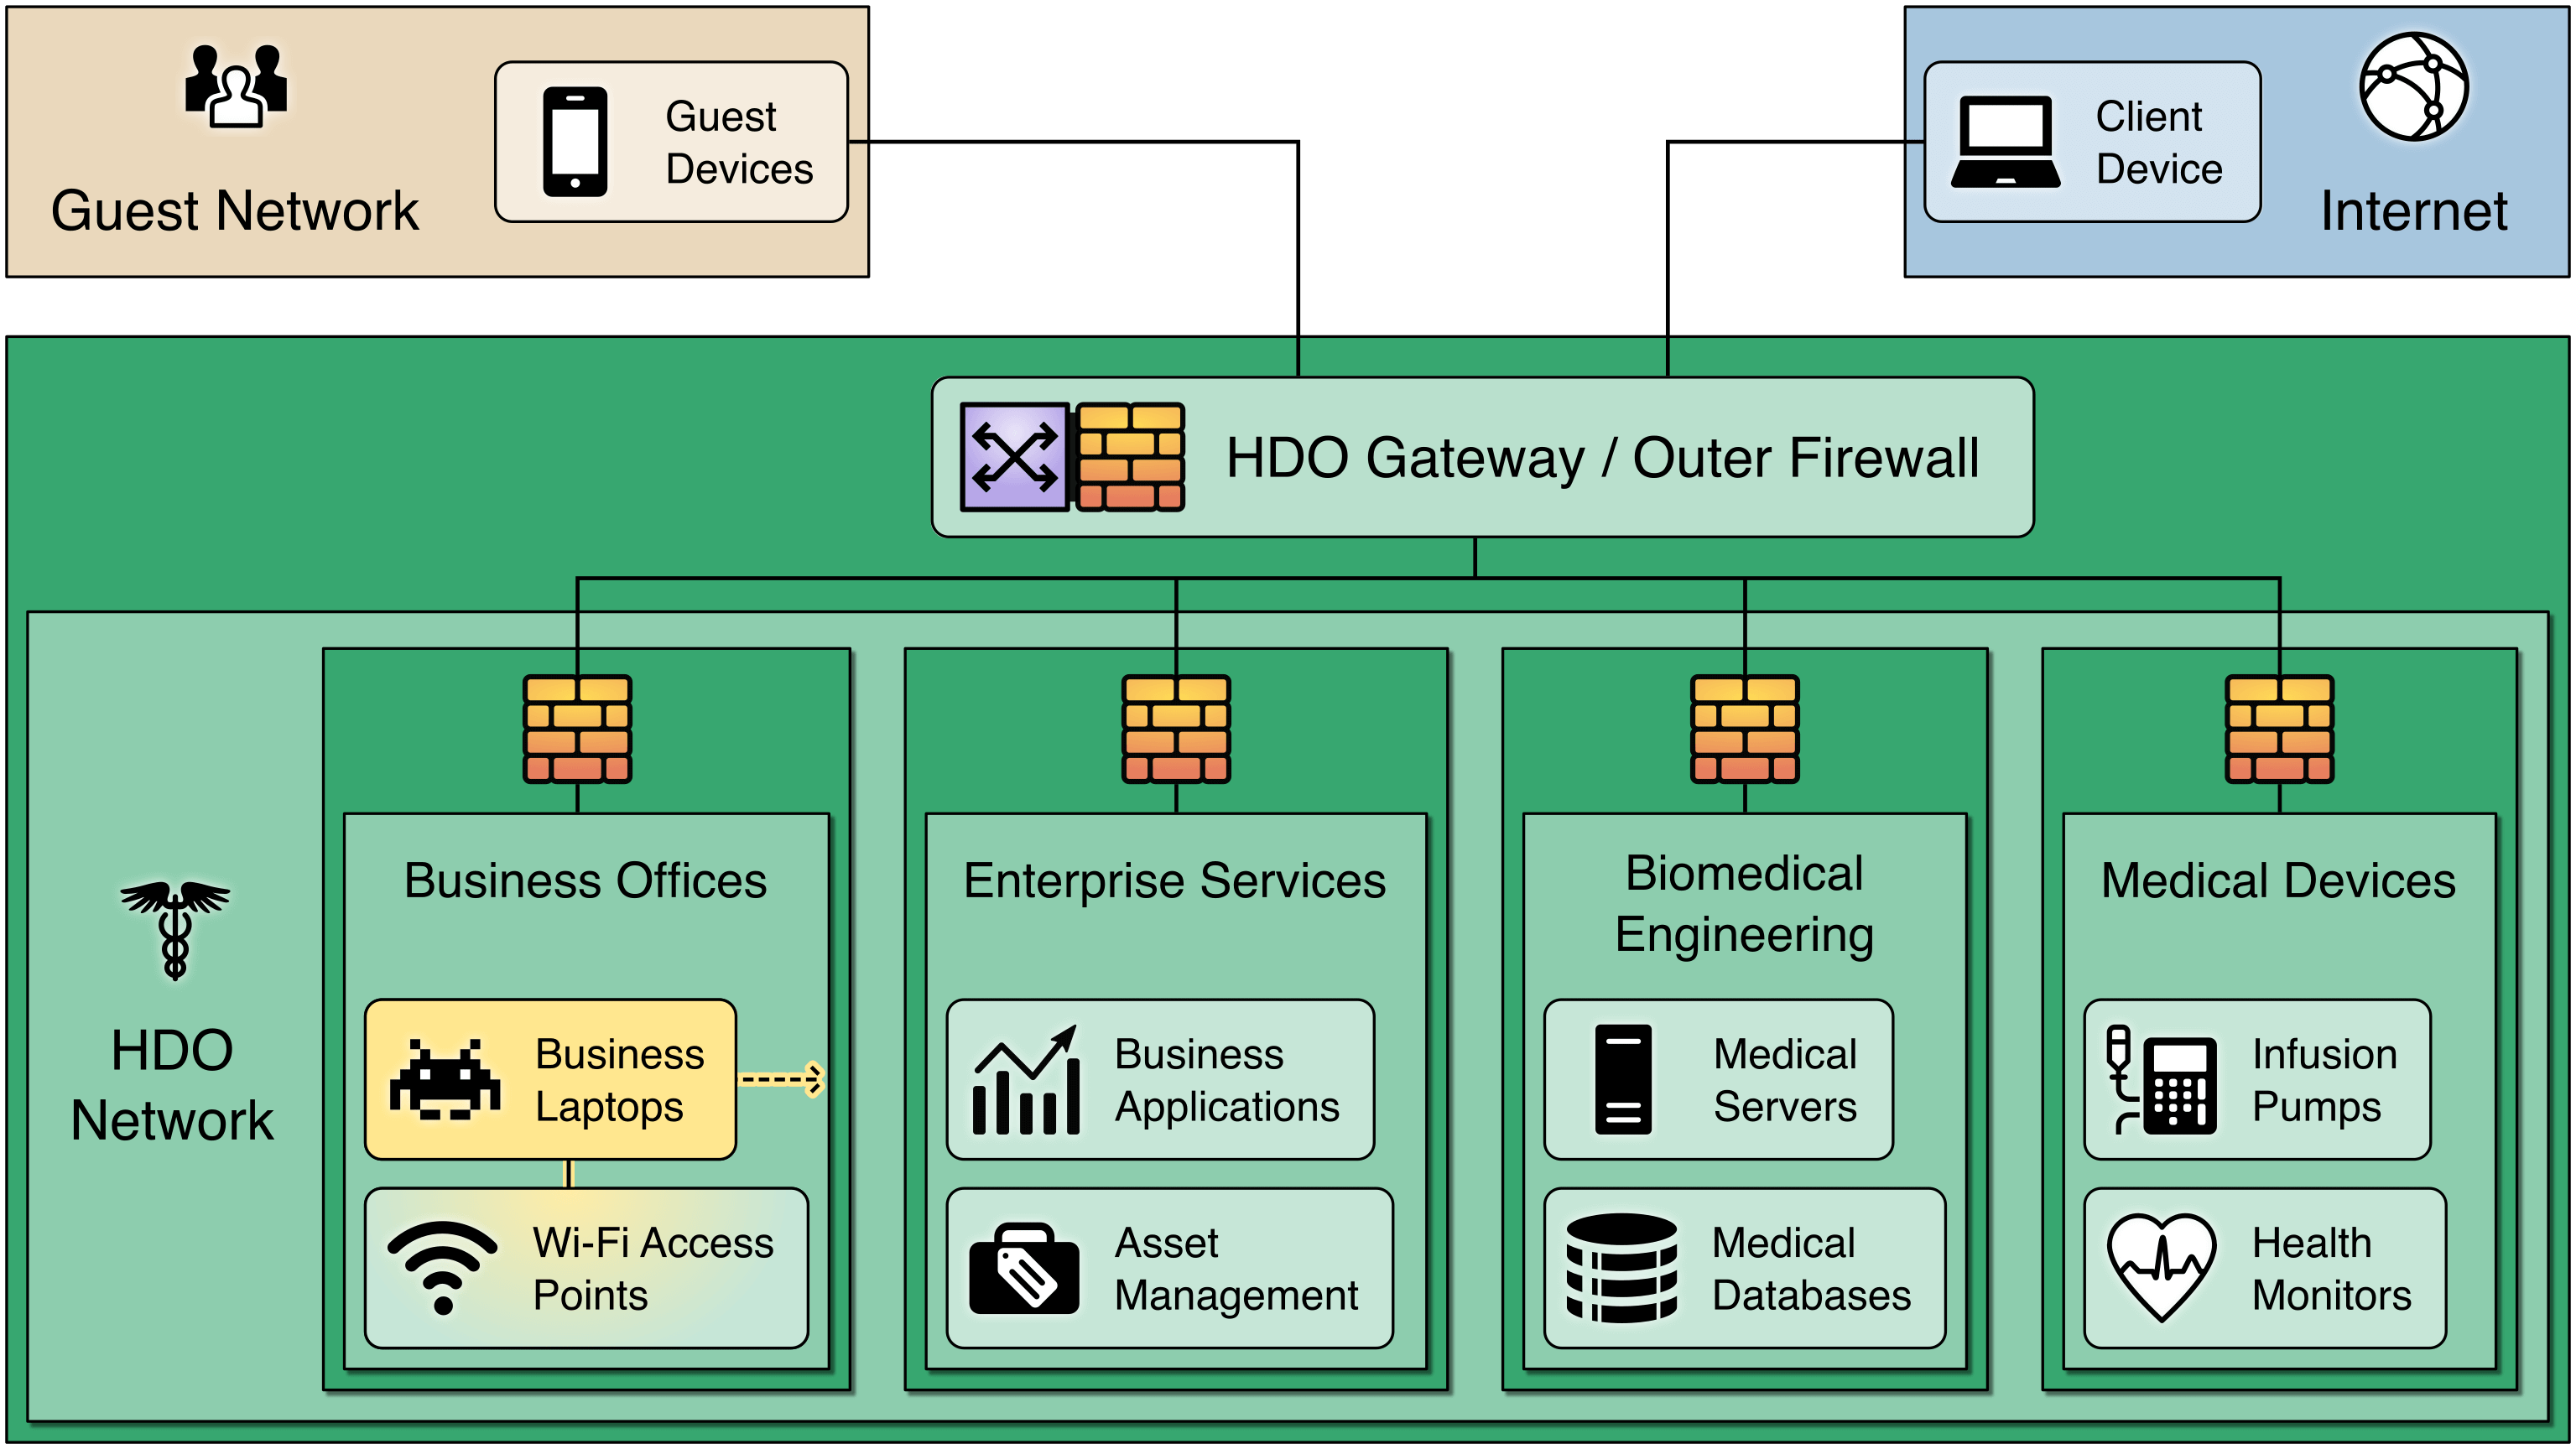 The image features the same architecture in the previous slide, with the segmented network. In this scenario, an external threat breaches one firewall, but is prevented from access other zones within the HDO’s segmented network.